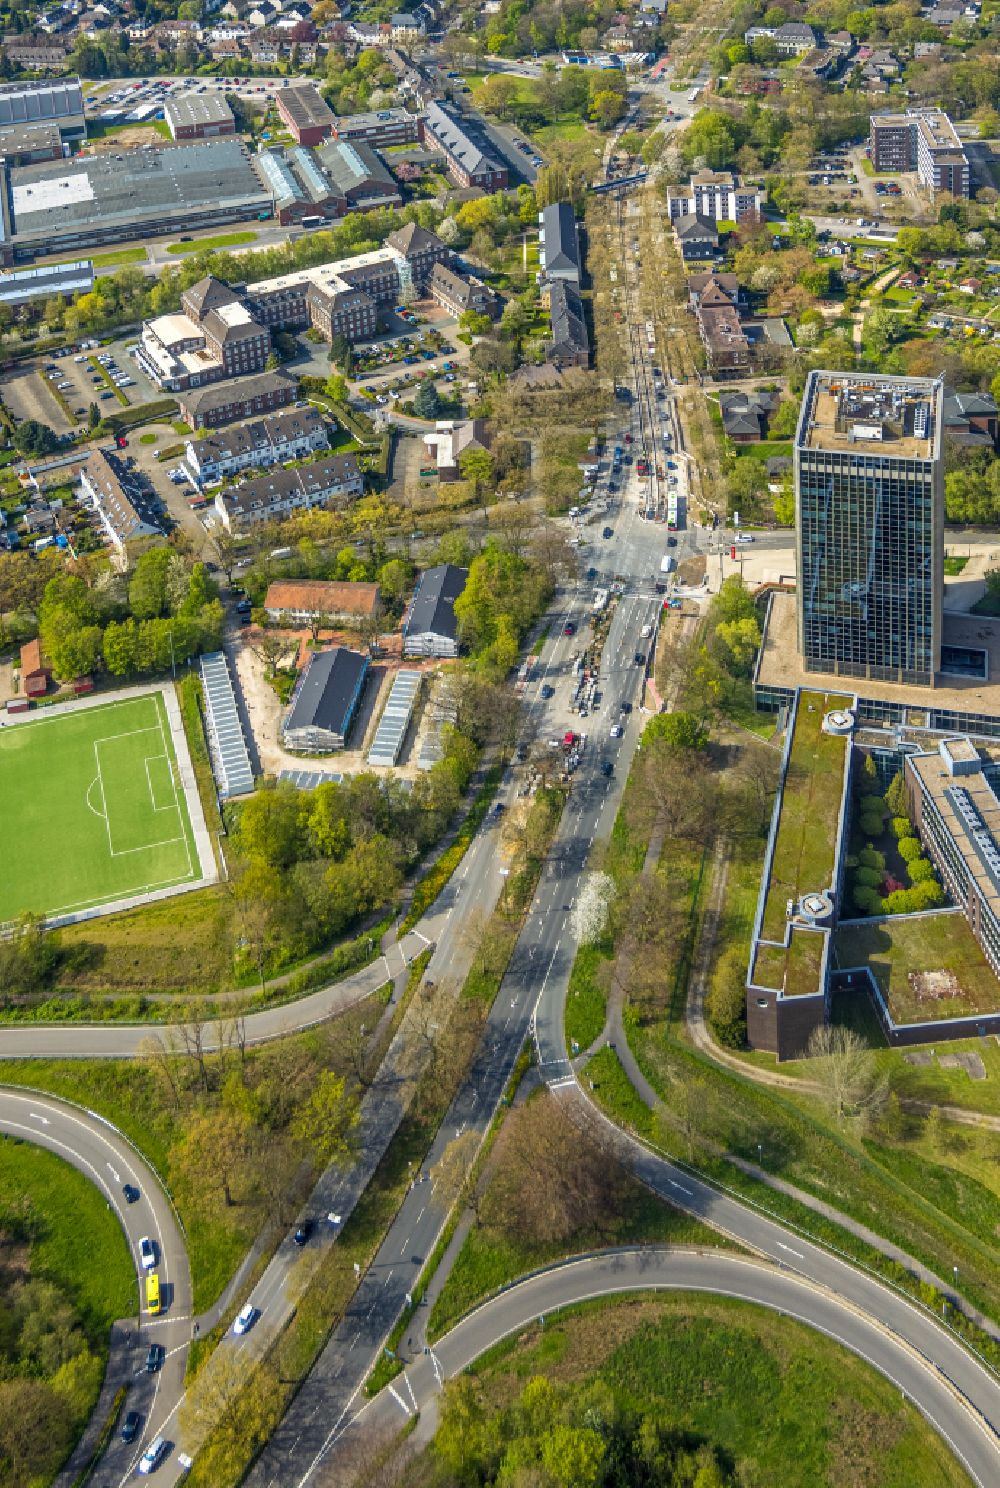 Aerial photograph Wiemelhausen - Office and administration buildings of the insurance company of Knappschaft on Knappschaftstrasse in Wiemelhausen in the state North Rhine-Westphalia, Germany